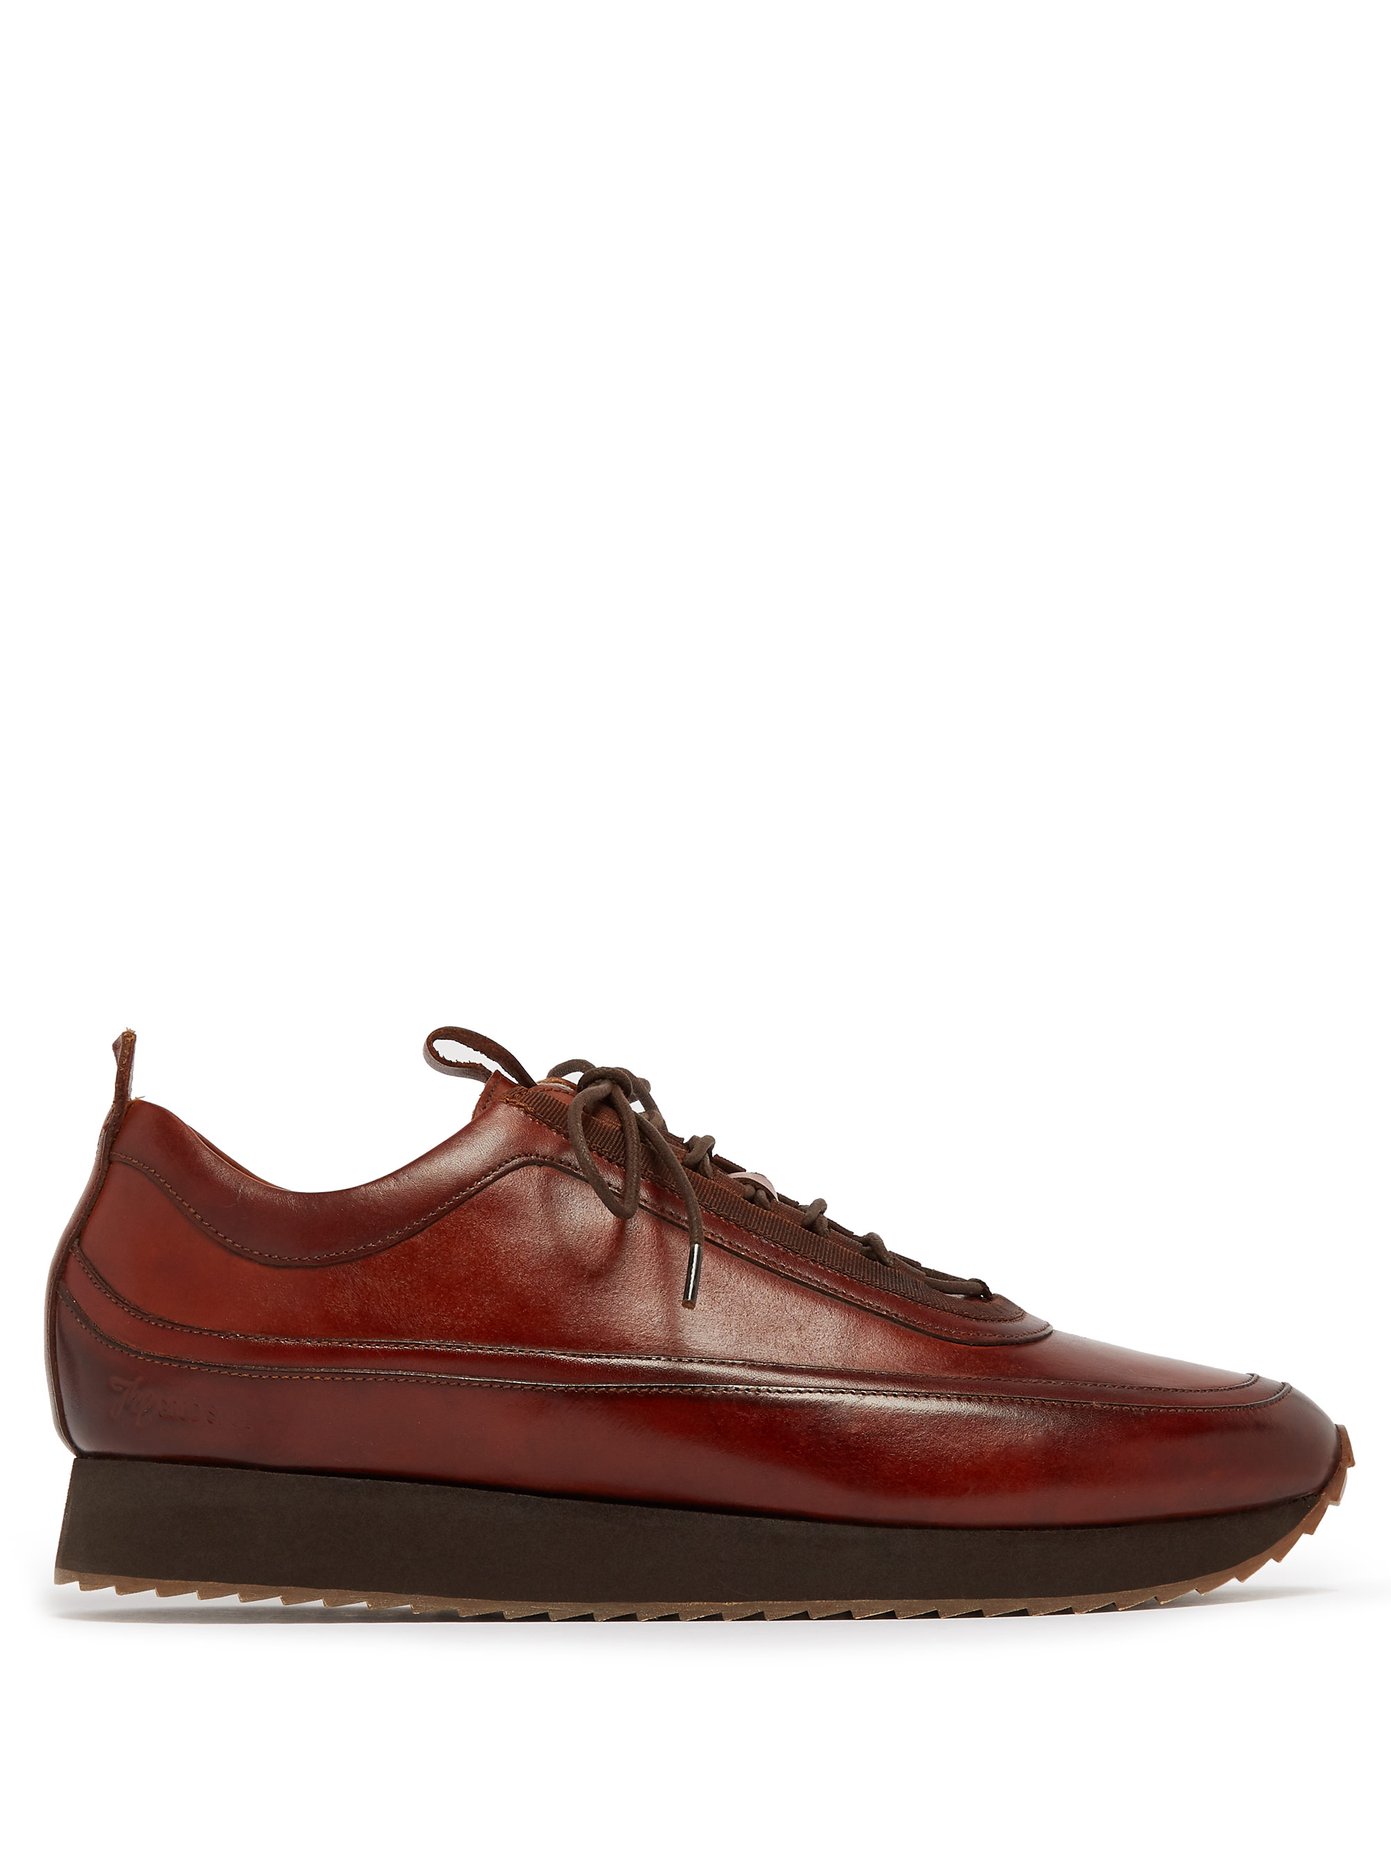 Sneaker 12 leather trainers | Grenson 